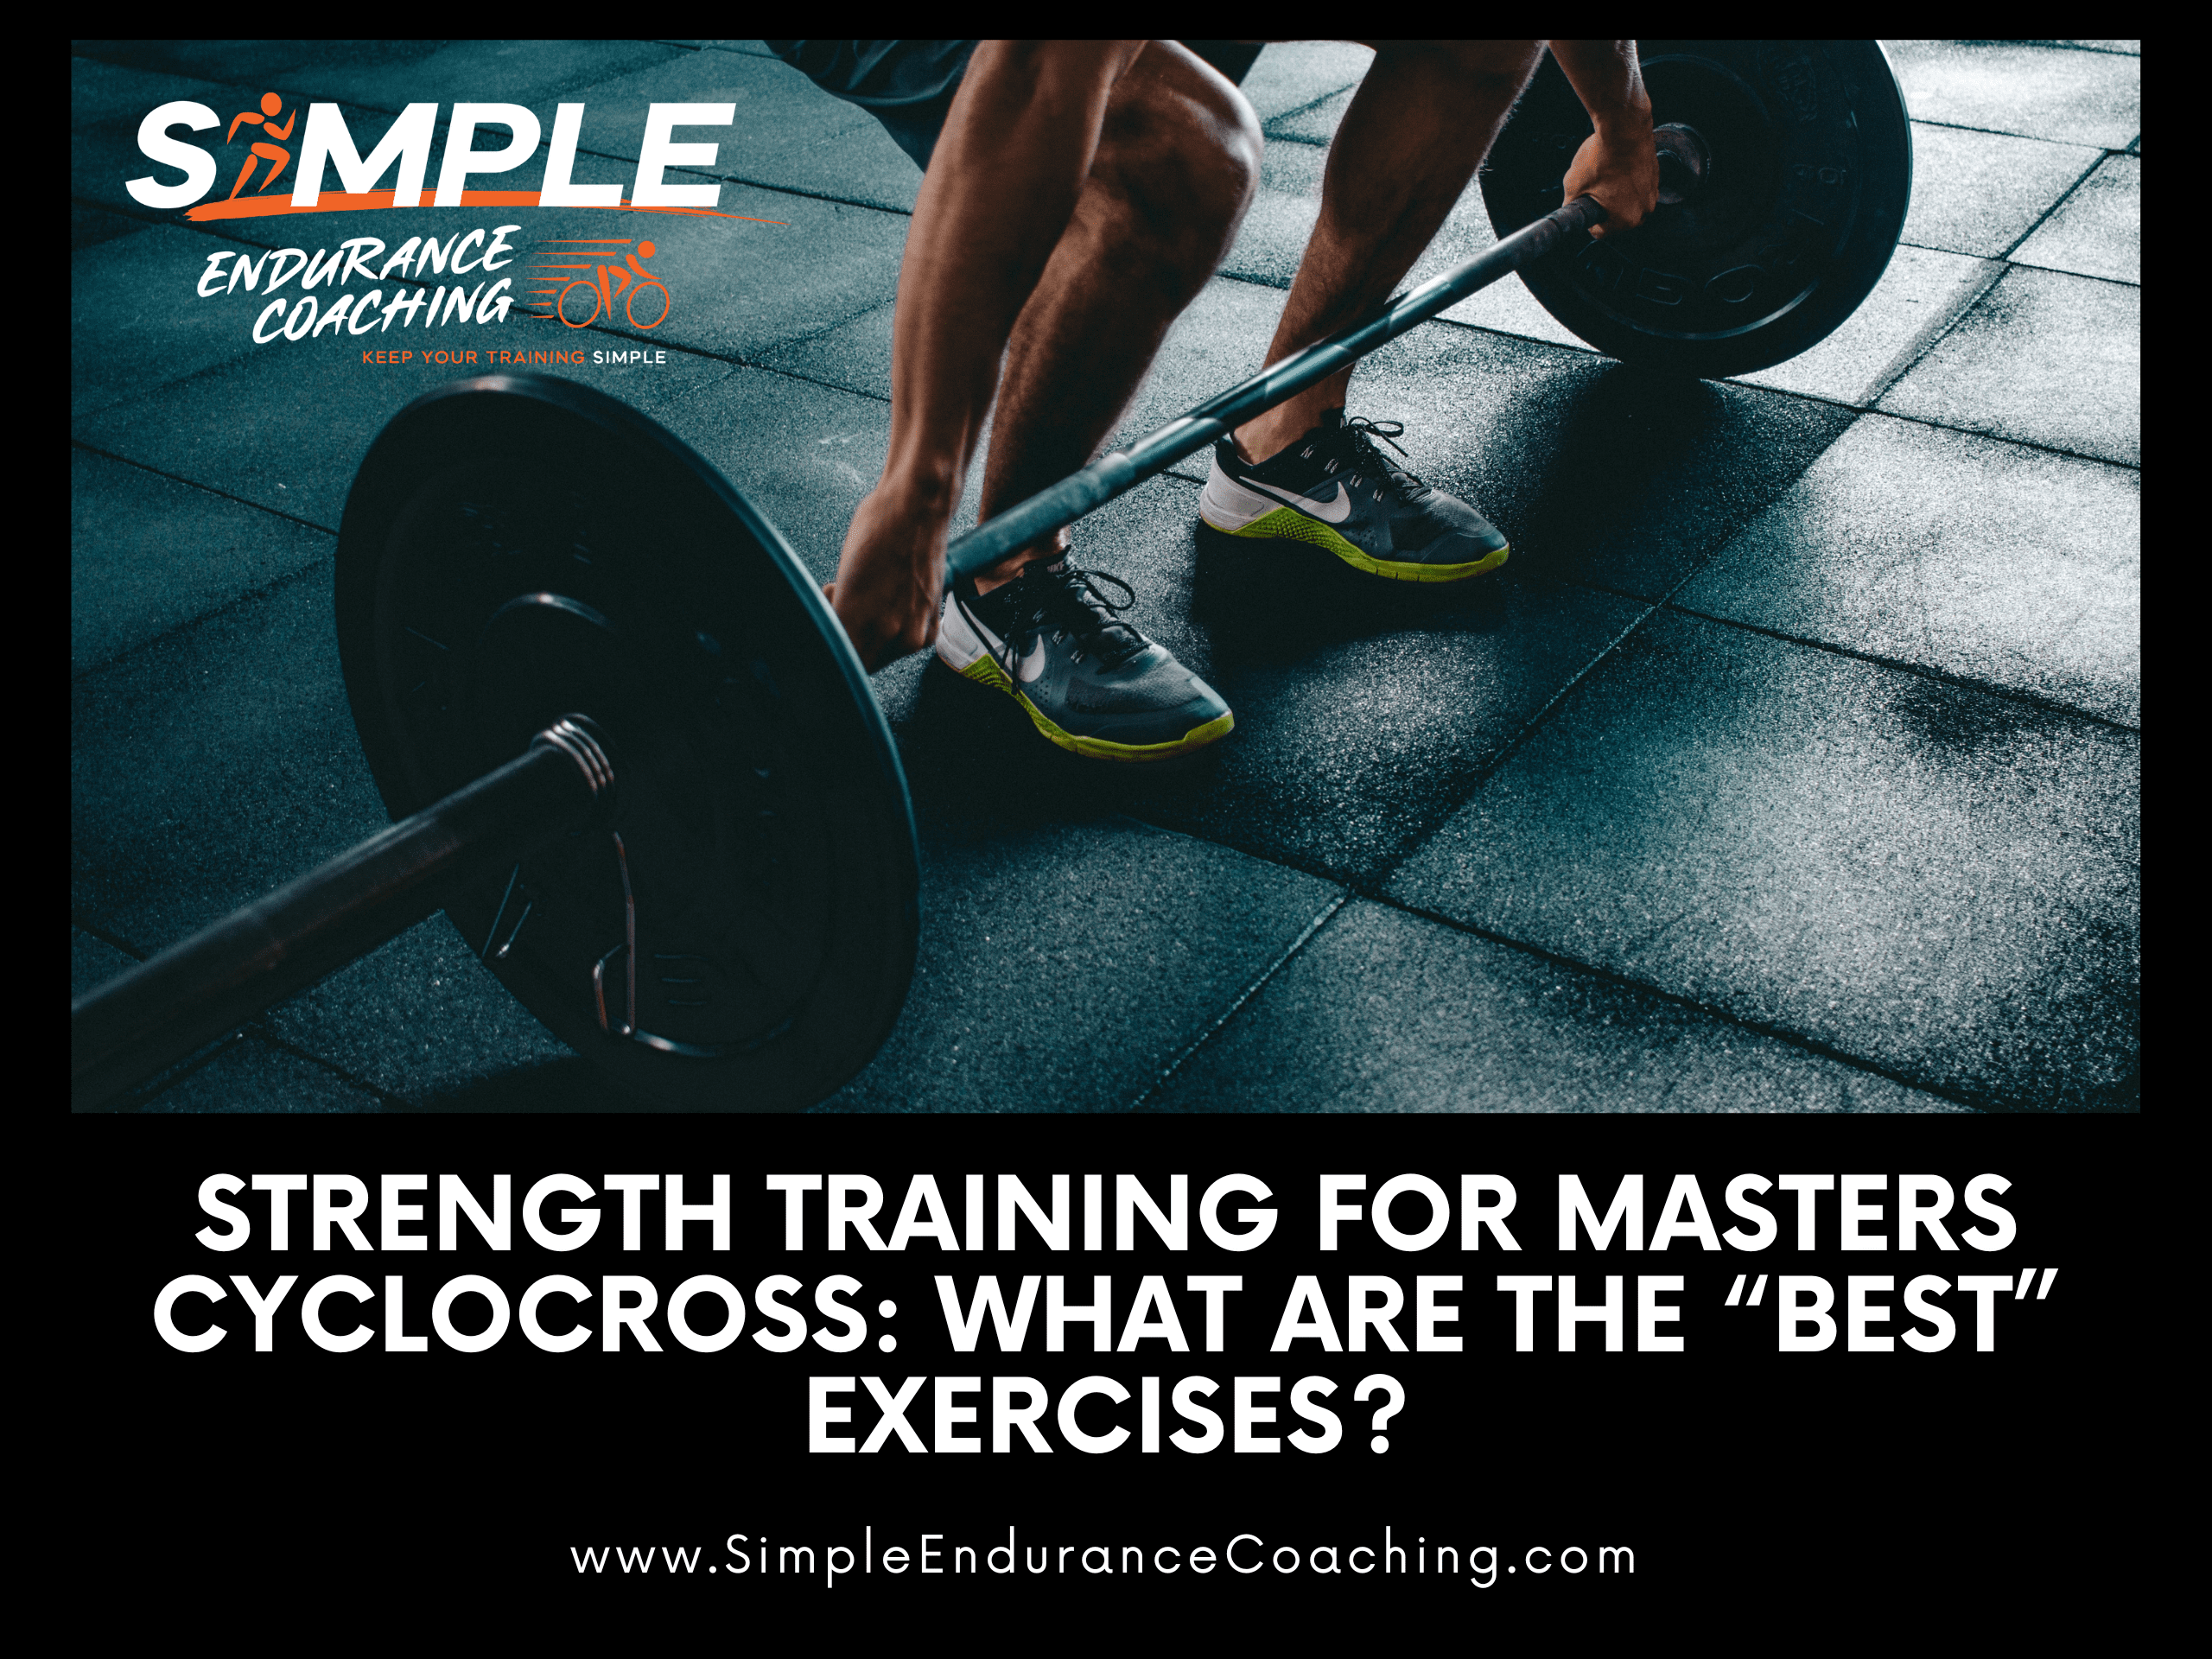 Strength training for masters cyclocross can make or break your season. Read this article to learn some of the best and most effective exercises you can try!